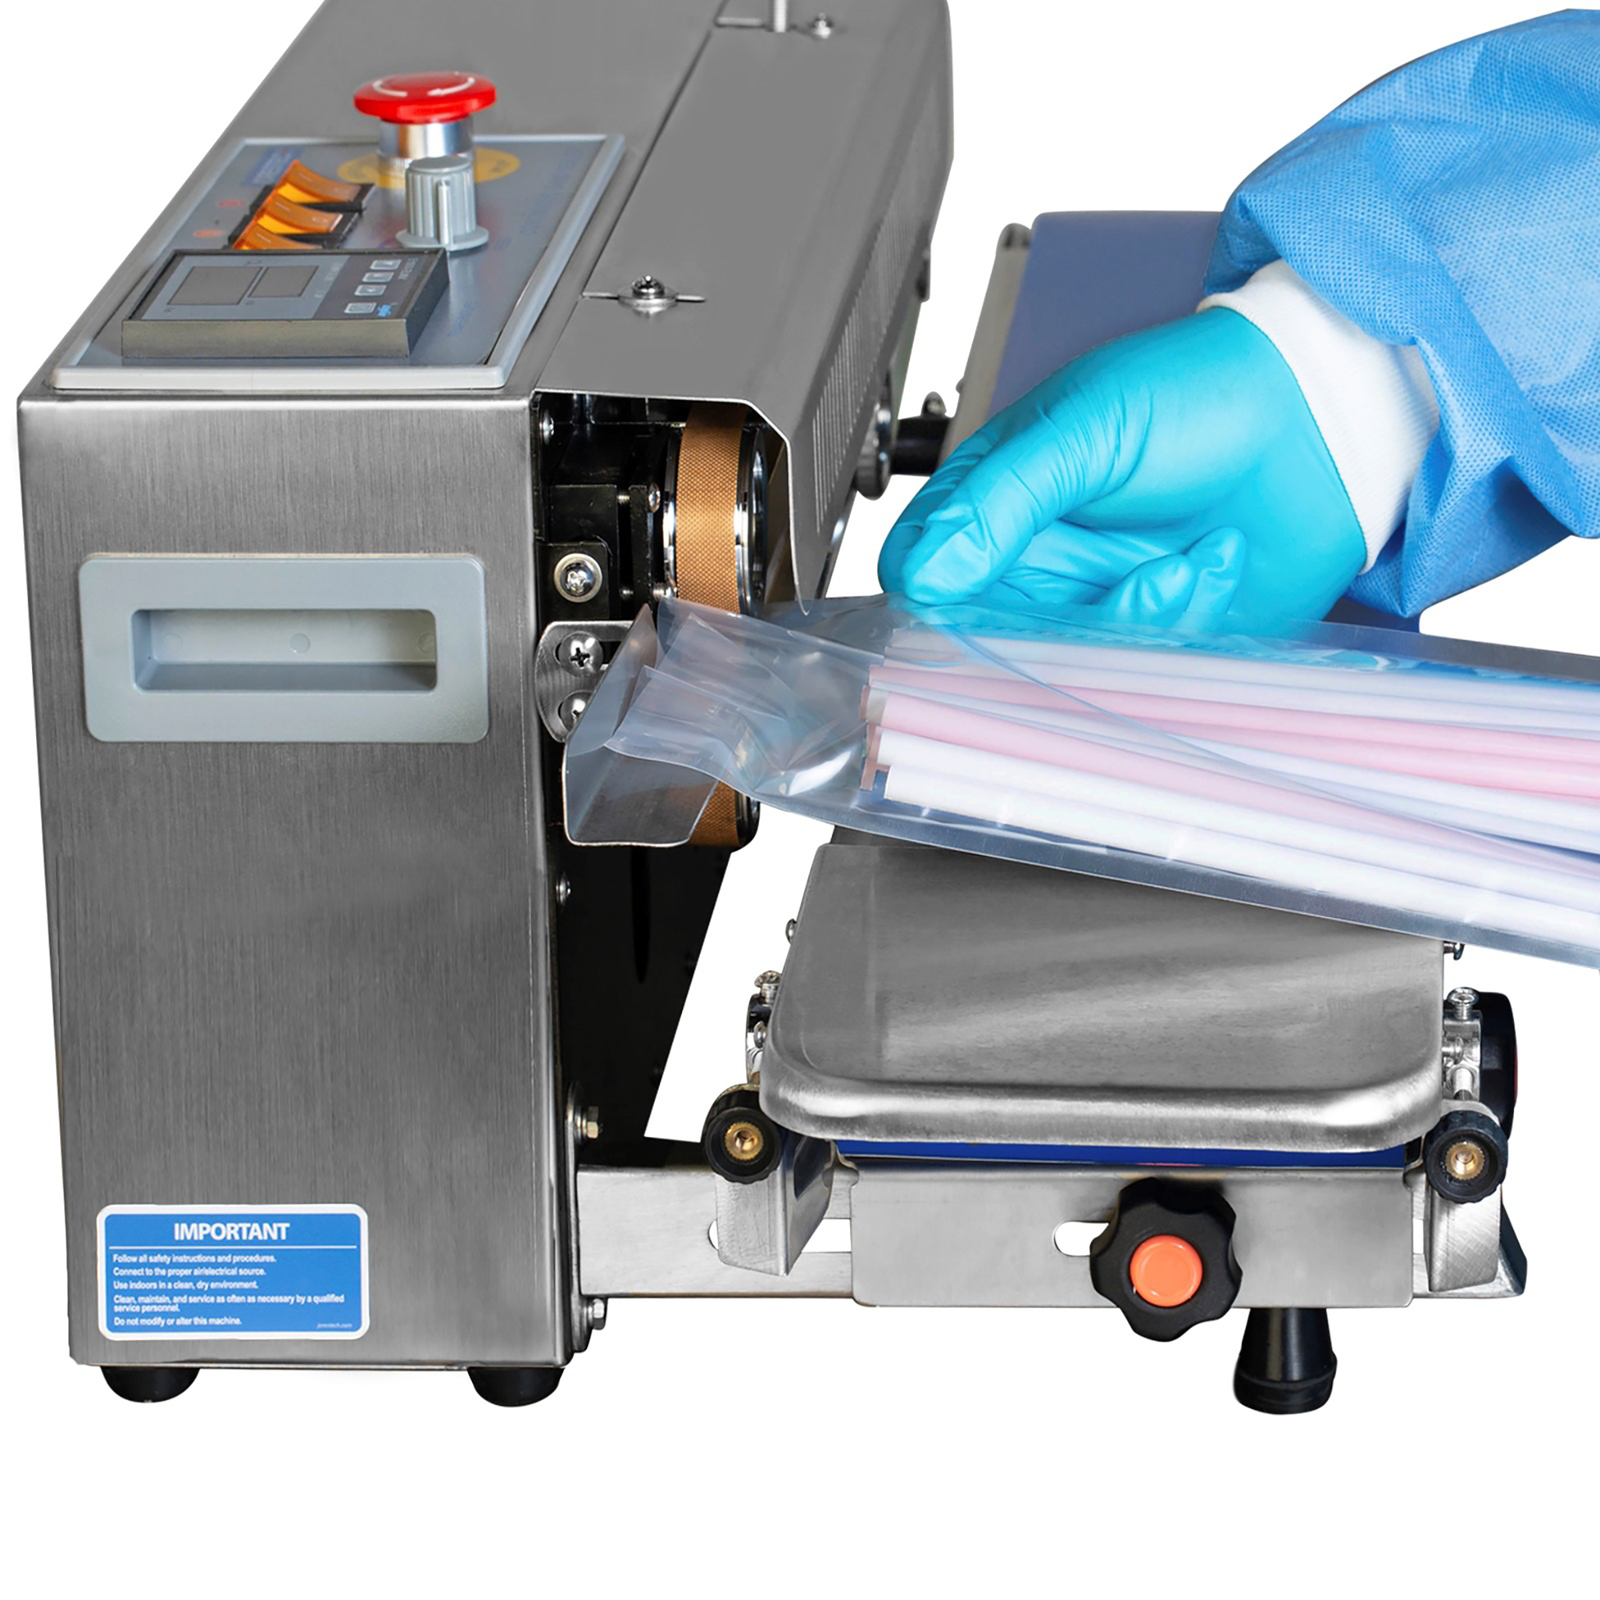 Operator wearing blue disposable gloves is inserting a clear bag filled with multi-colored straws from left side of a JORESTECH left to right continuous band sealer with digital temperature control panel to get the plastic bag sealed.